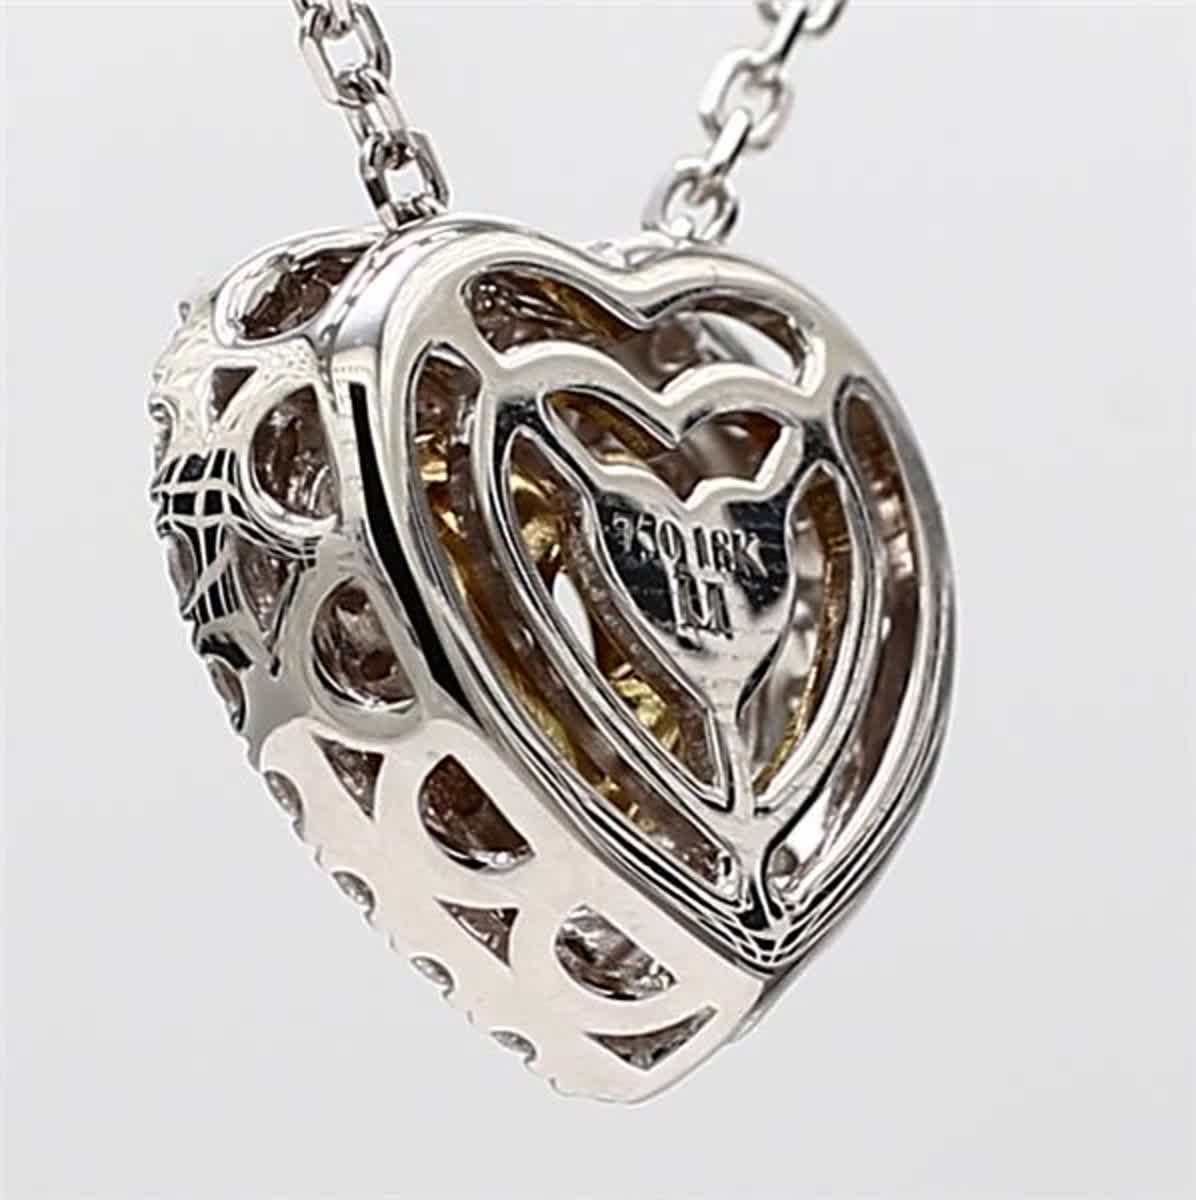 GIA Certified Natural Brown Heart and White Diamond 1.52 Carat TW Gold Pendant